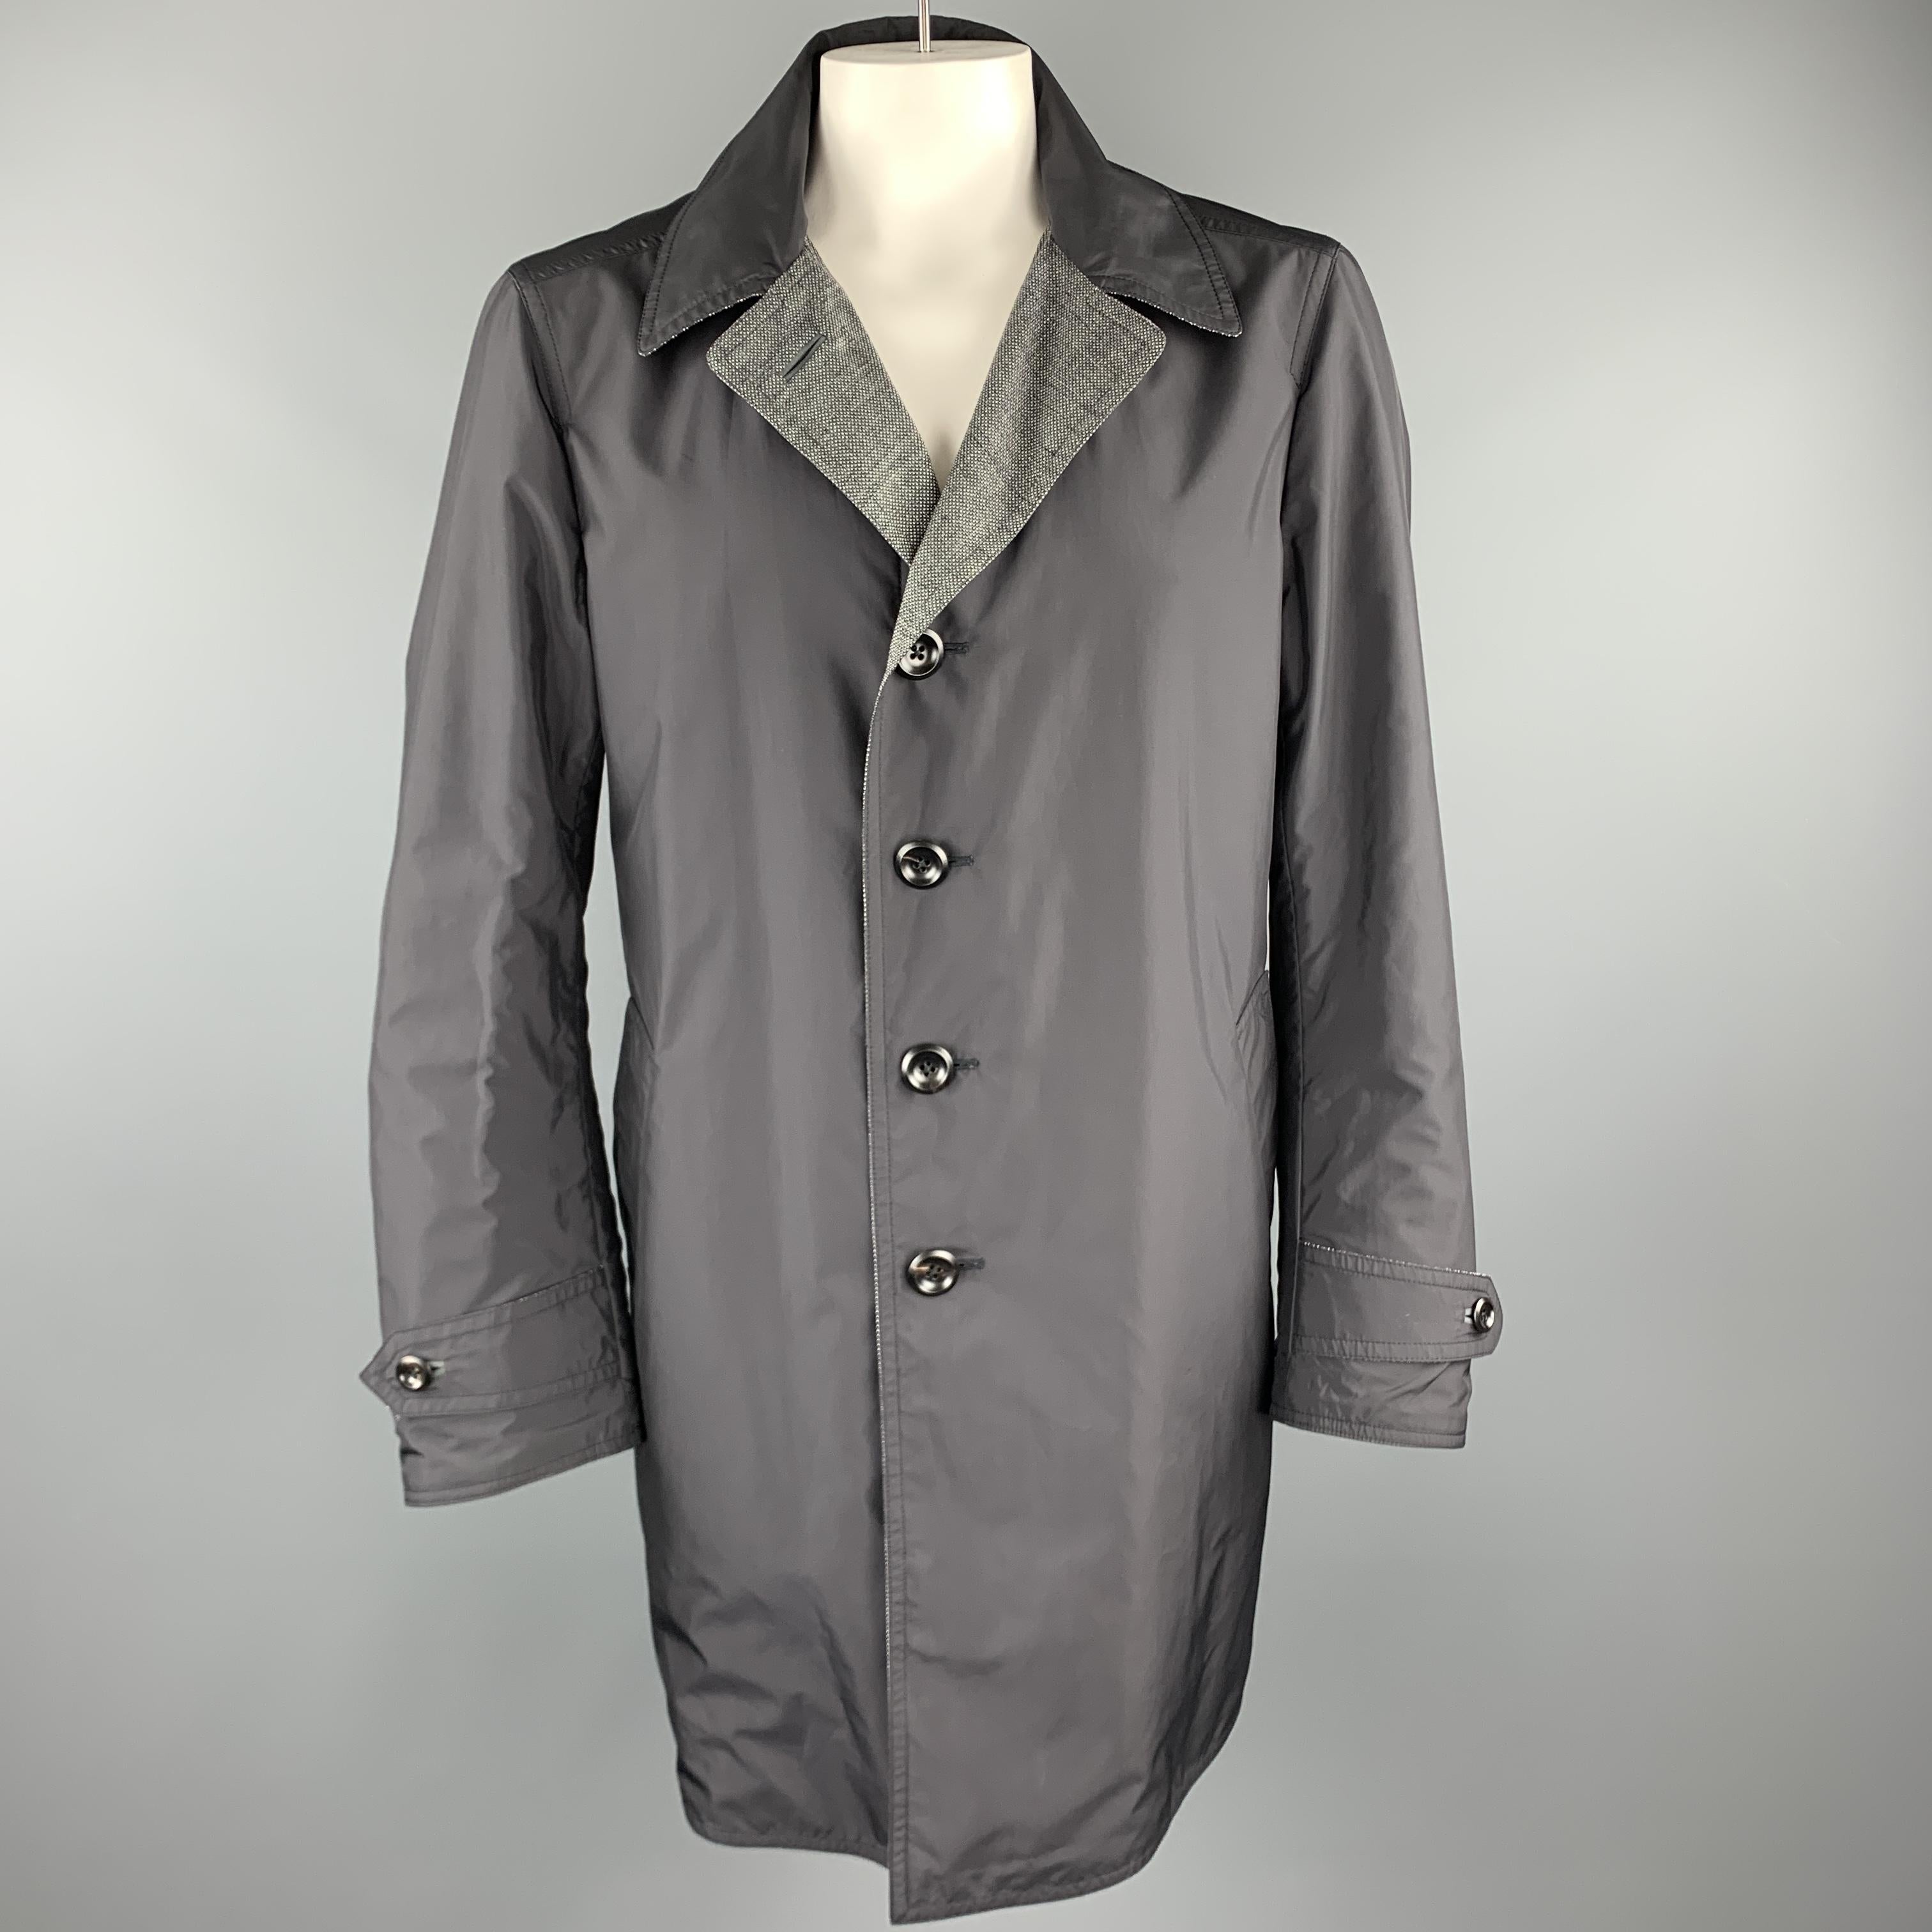 TOM FORD trench coat comes in wool, linen, silk blend heathered woven material with a pointed collar hidden placket button front, slated pockets,tab cuffs sleeves, and reverse black waterproof side. Made in Italy.

Excellent Pre-Owned Condition.